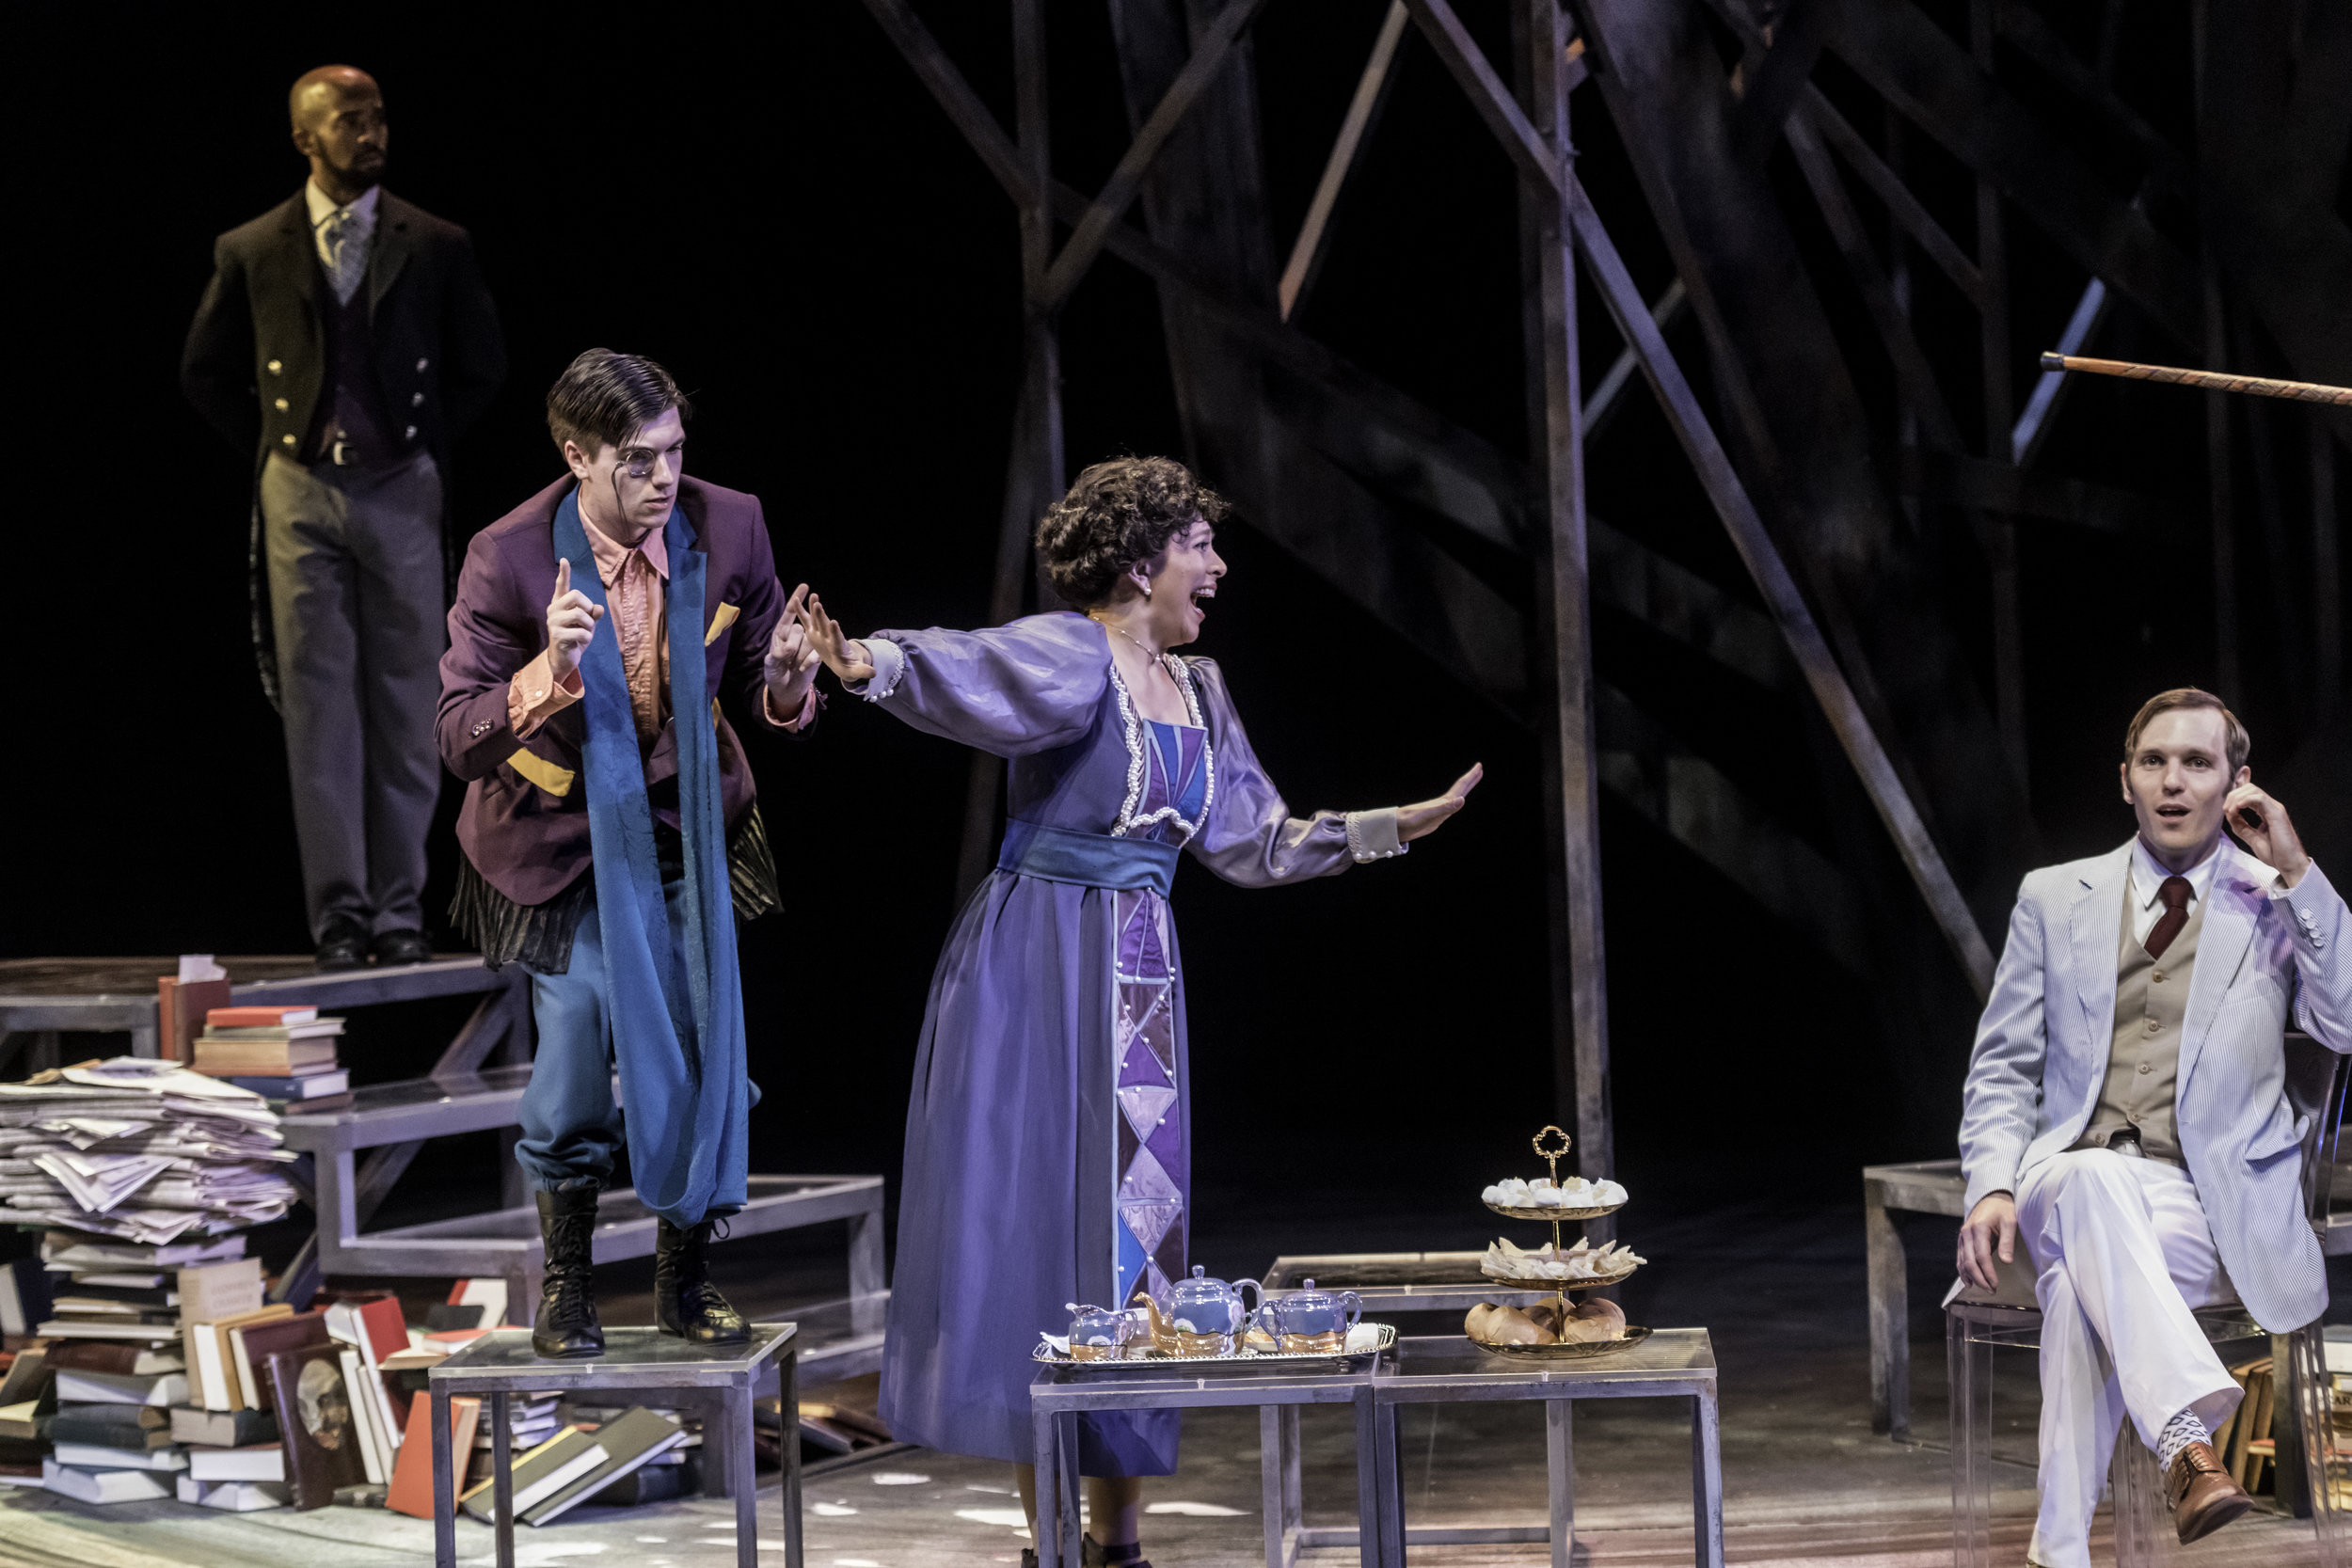  As Gwendolyn,&nbsp;cutting off Tzara (Kevin Blair) as Henry Carr (Chris Sheard) and Bennett (Jordan Gleaves) look on. Oh, and the entire scene is in limerick form.&nbsp;Travesties | by Tom Stoppard | at Krannert Center for the Performing Arts | Dire